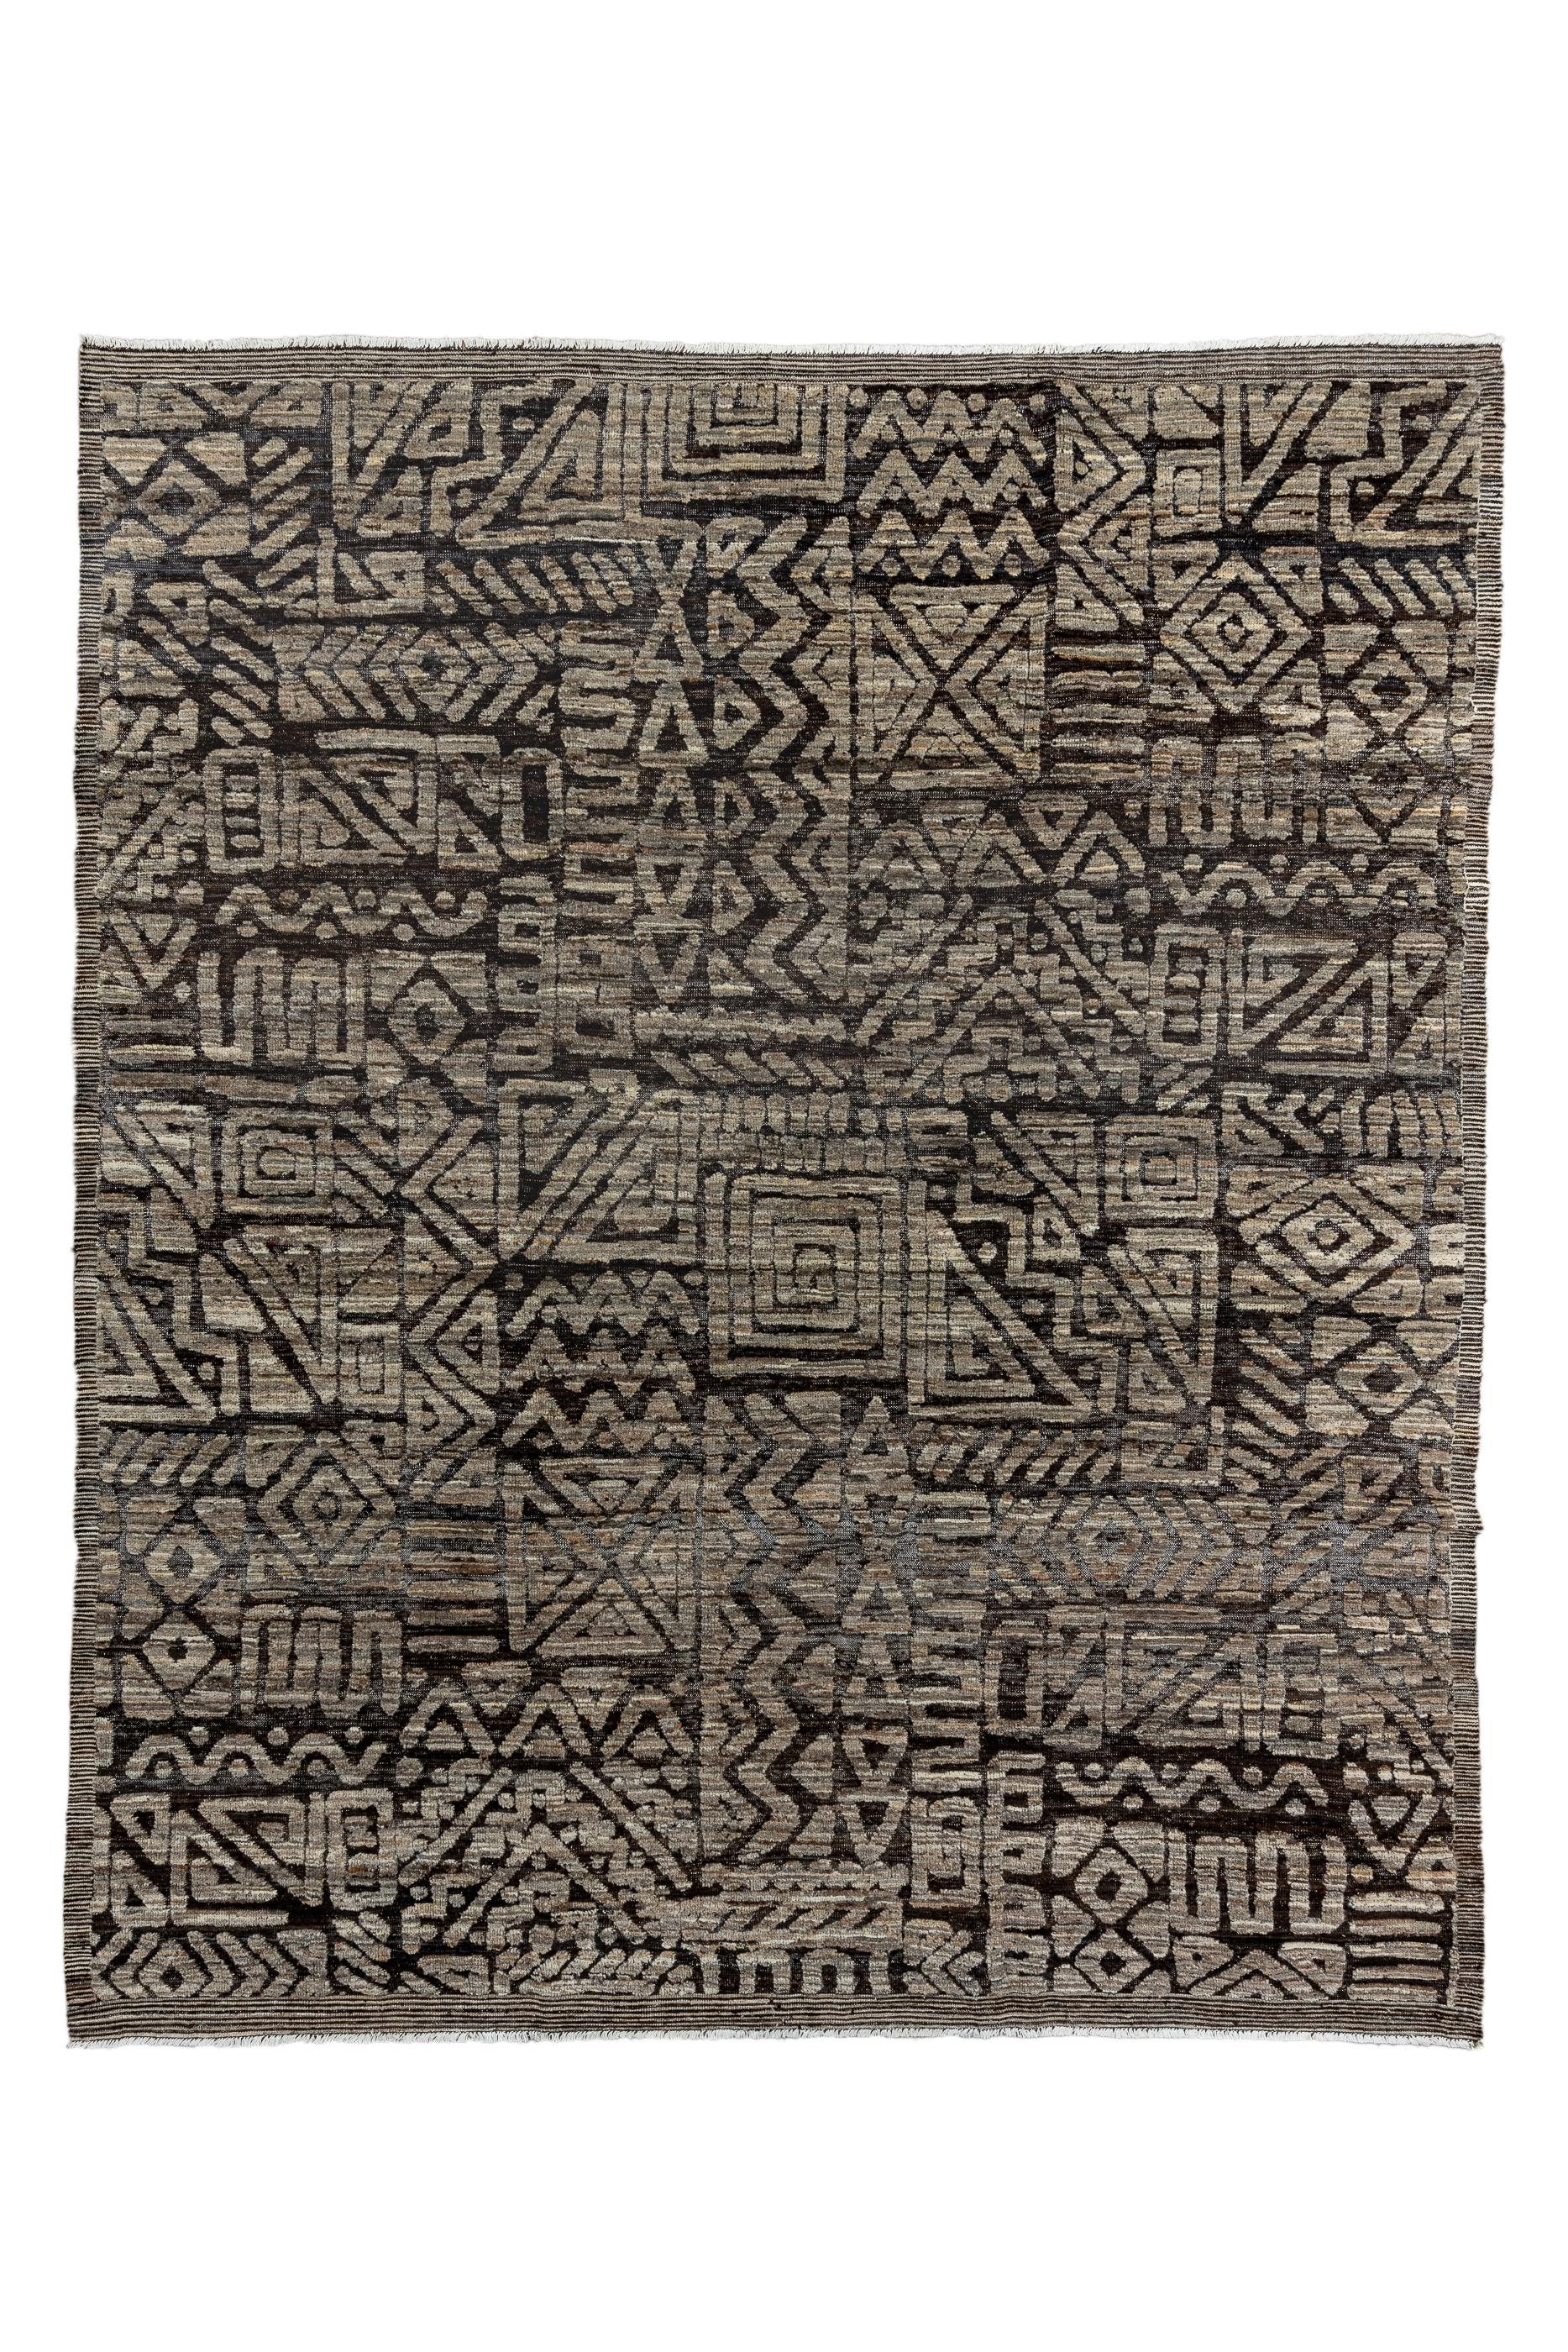 This rustic carpet shows a faintly African look, with a welter of zig-zags, triangles, squared S’s, nested lozenges,  and wavy sections, all arranged asymmetrically  in visibly abrashed tan on a dark brown field. No real borders. The seemingly